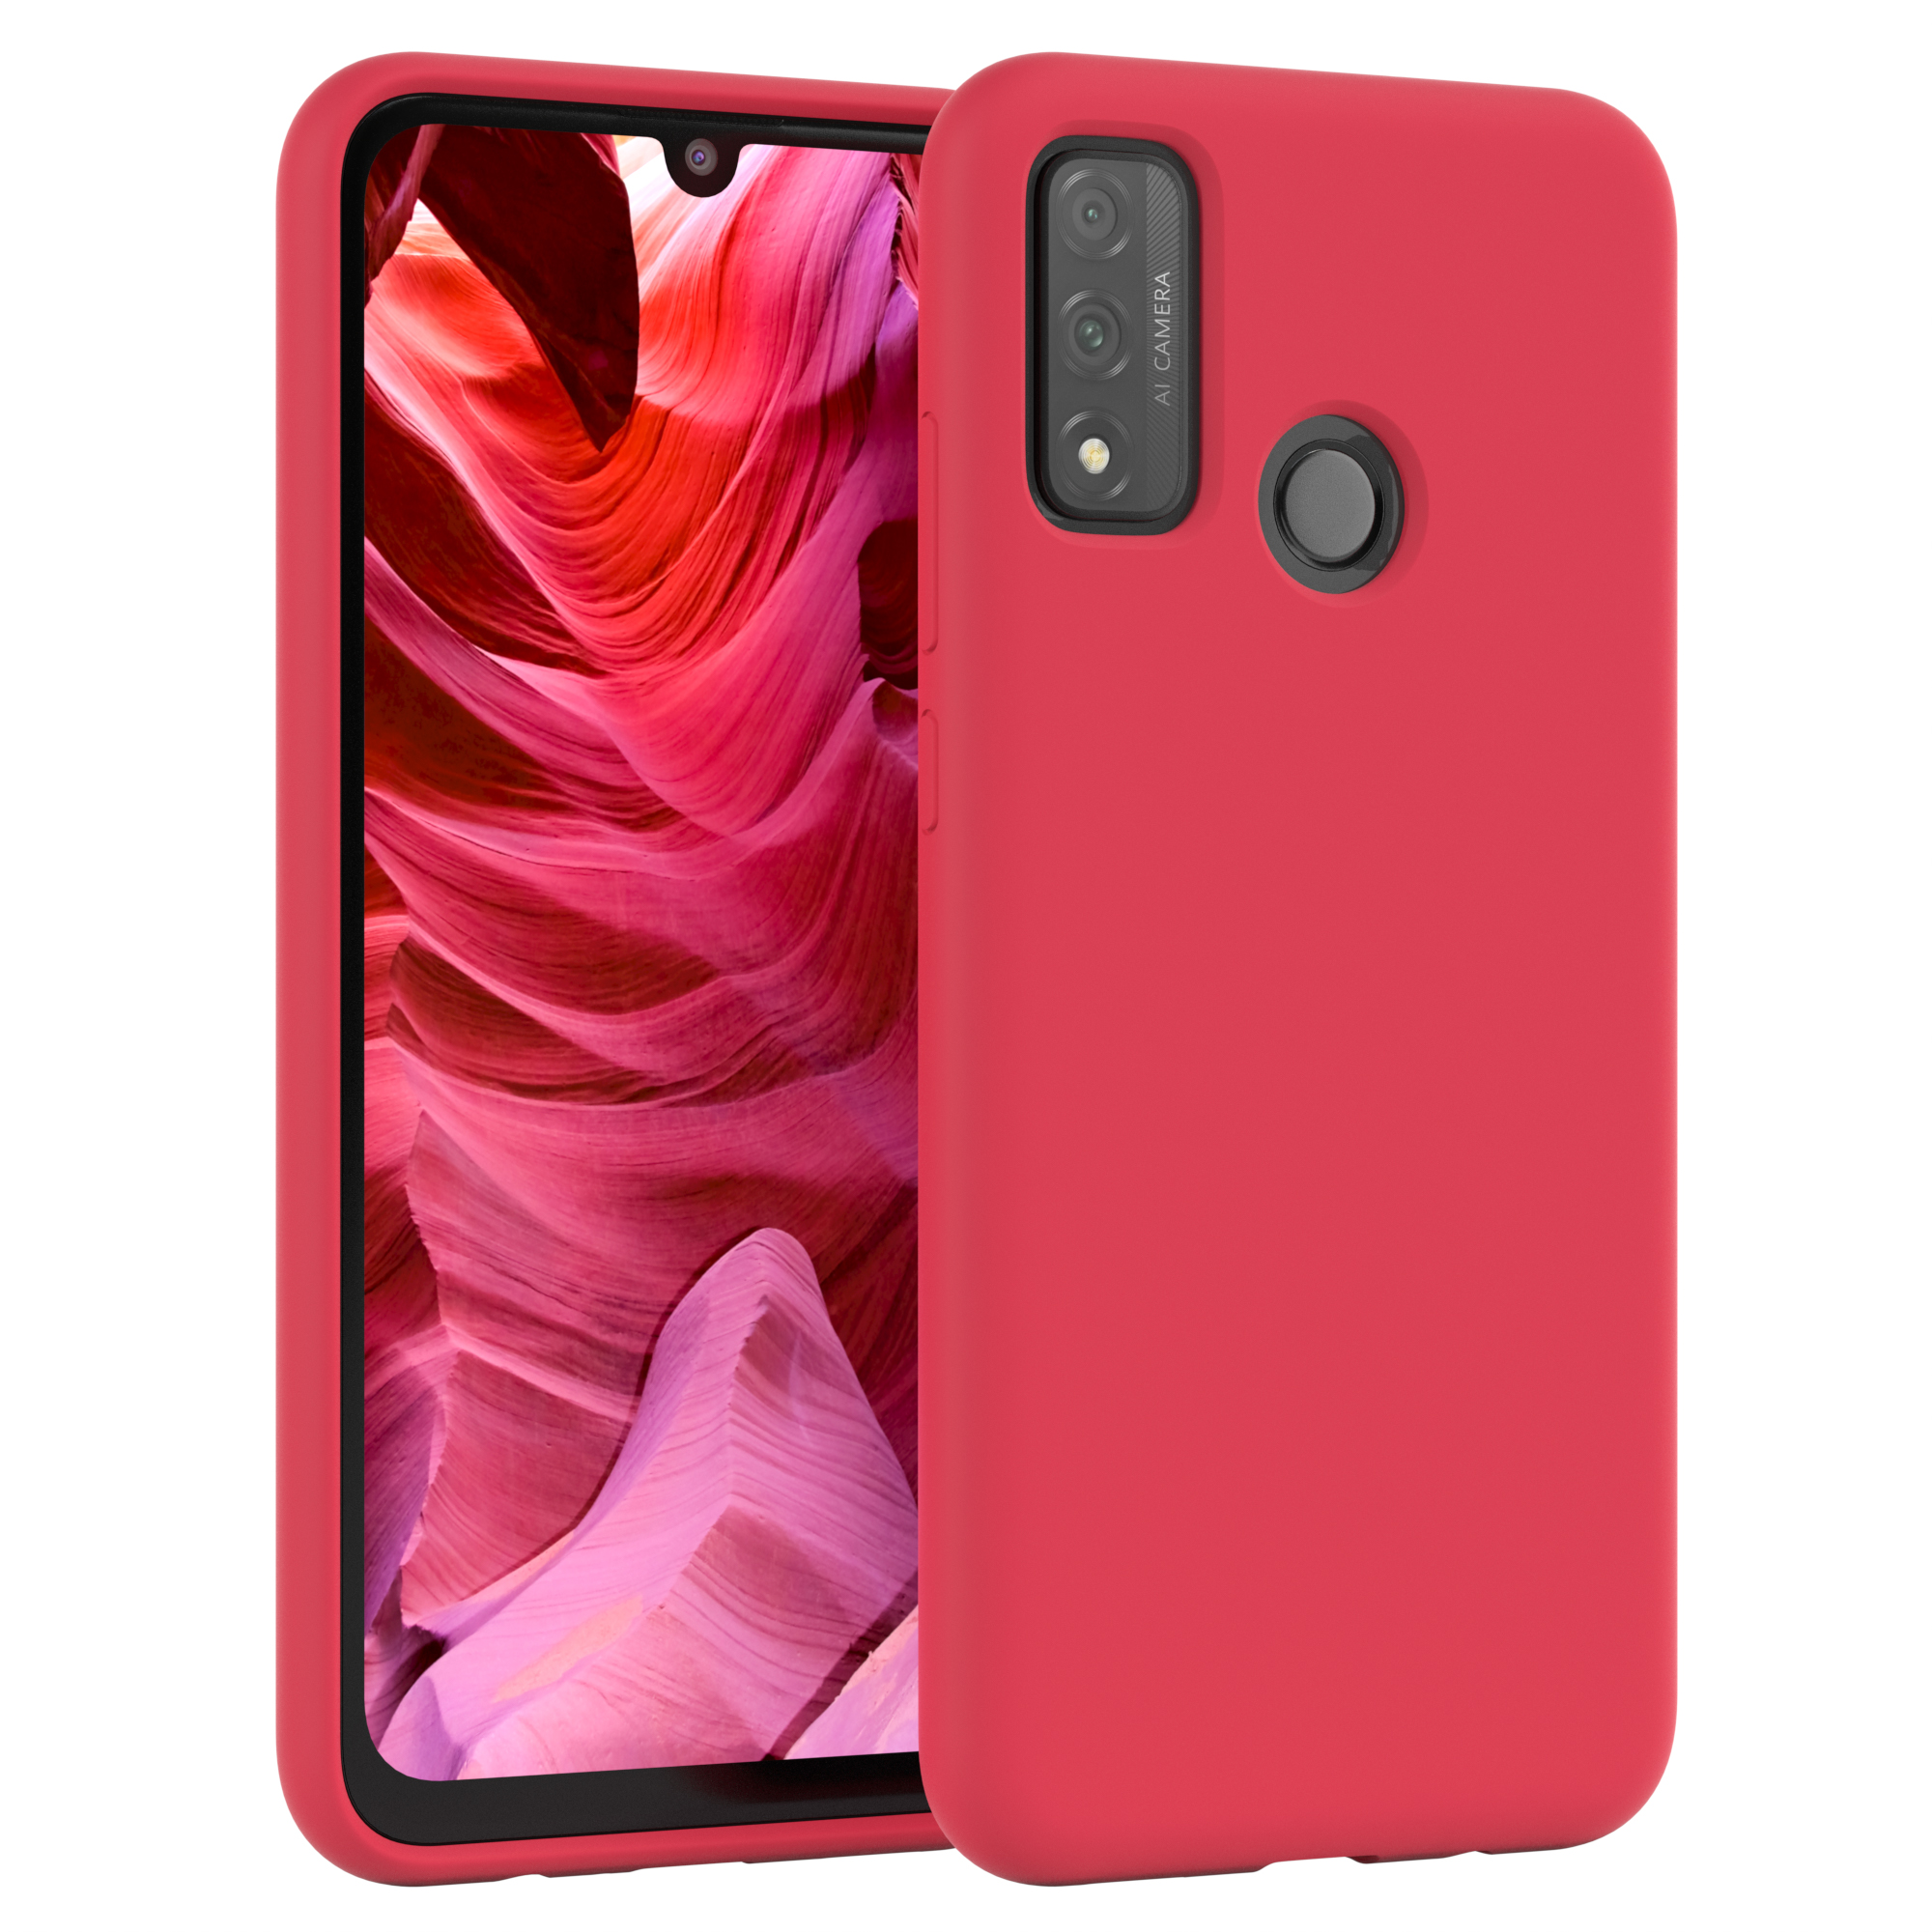 EAZY CASE / Silikon Handycase, Rot P Premium Backcover, Huawei, Beere Smart (2020)